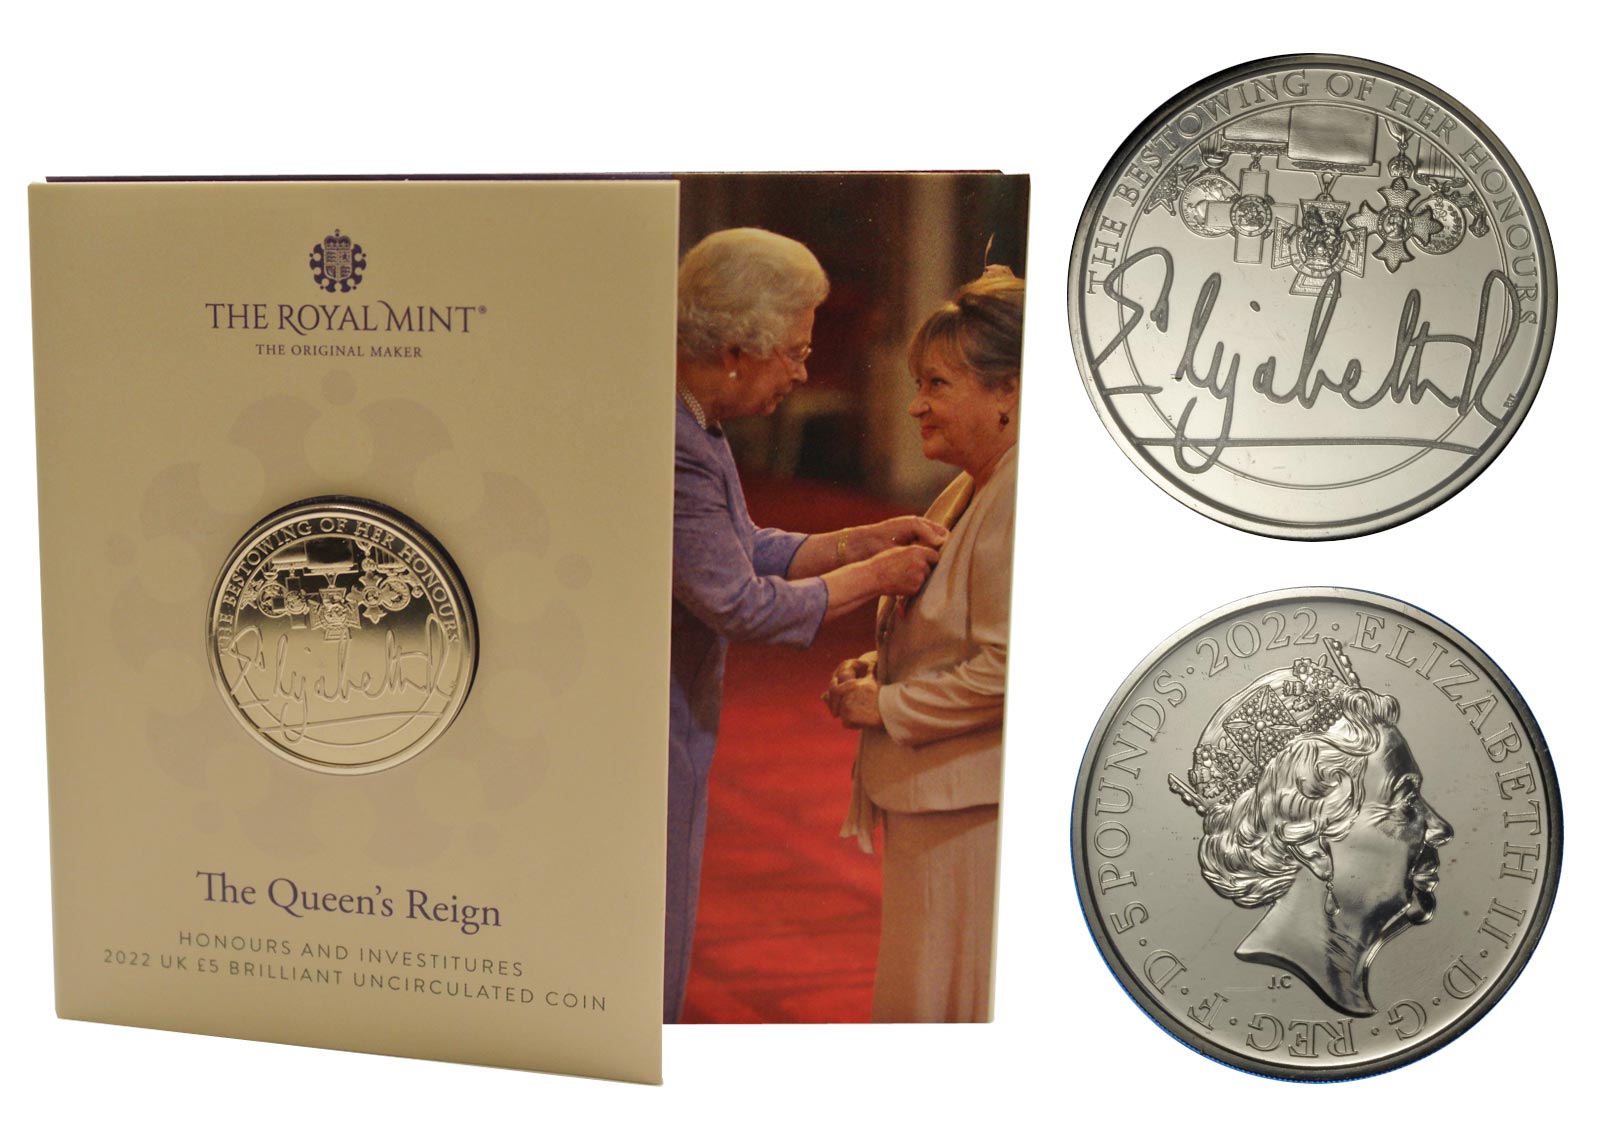 "The Queen's Reign: onorificenze e investiture" - 5 pounds in nickel in folder